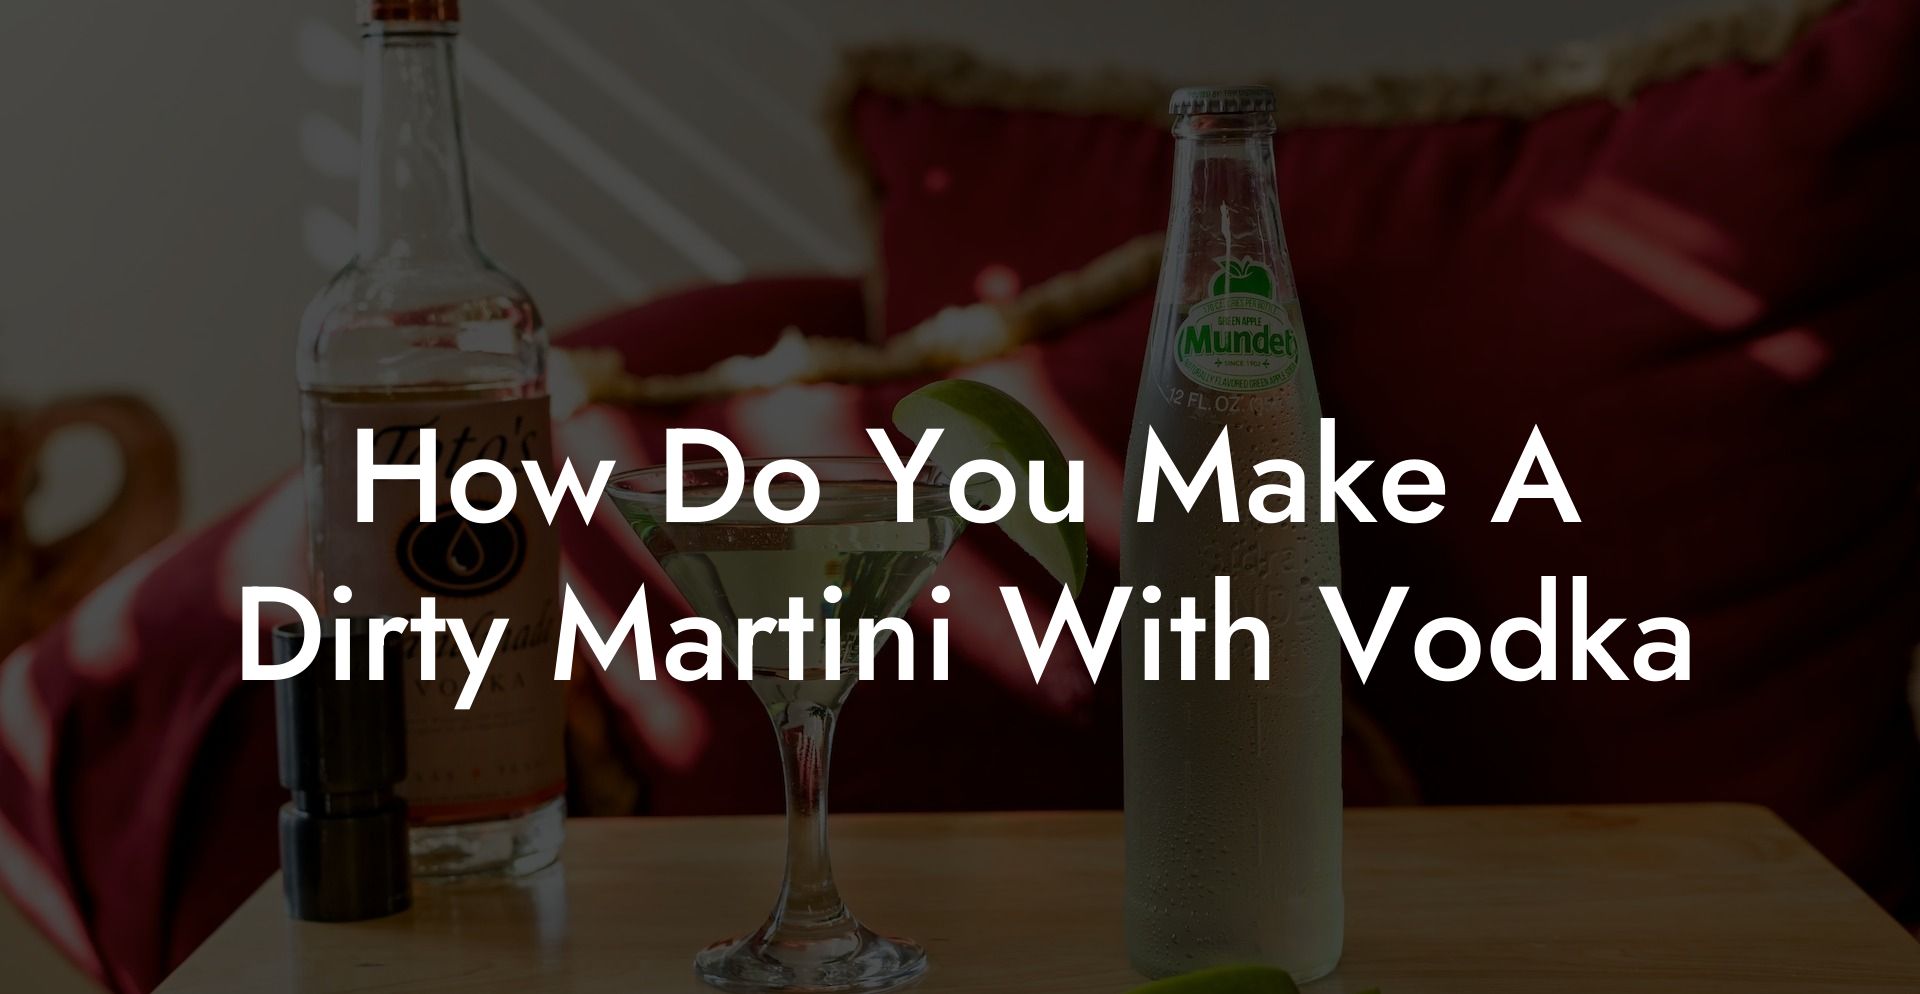 How Do You Make A Dirty Martini With Vodka